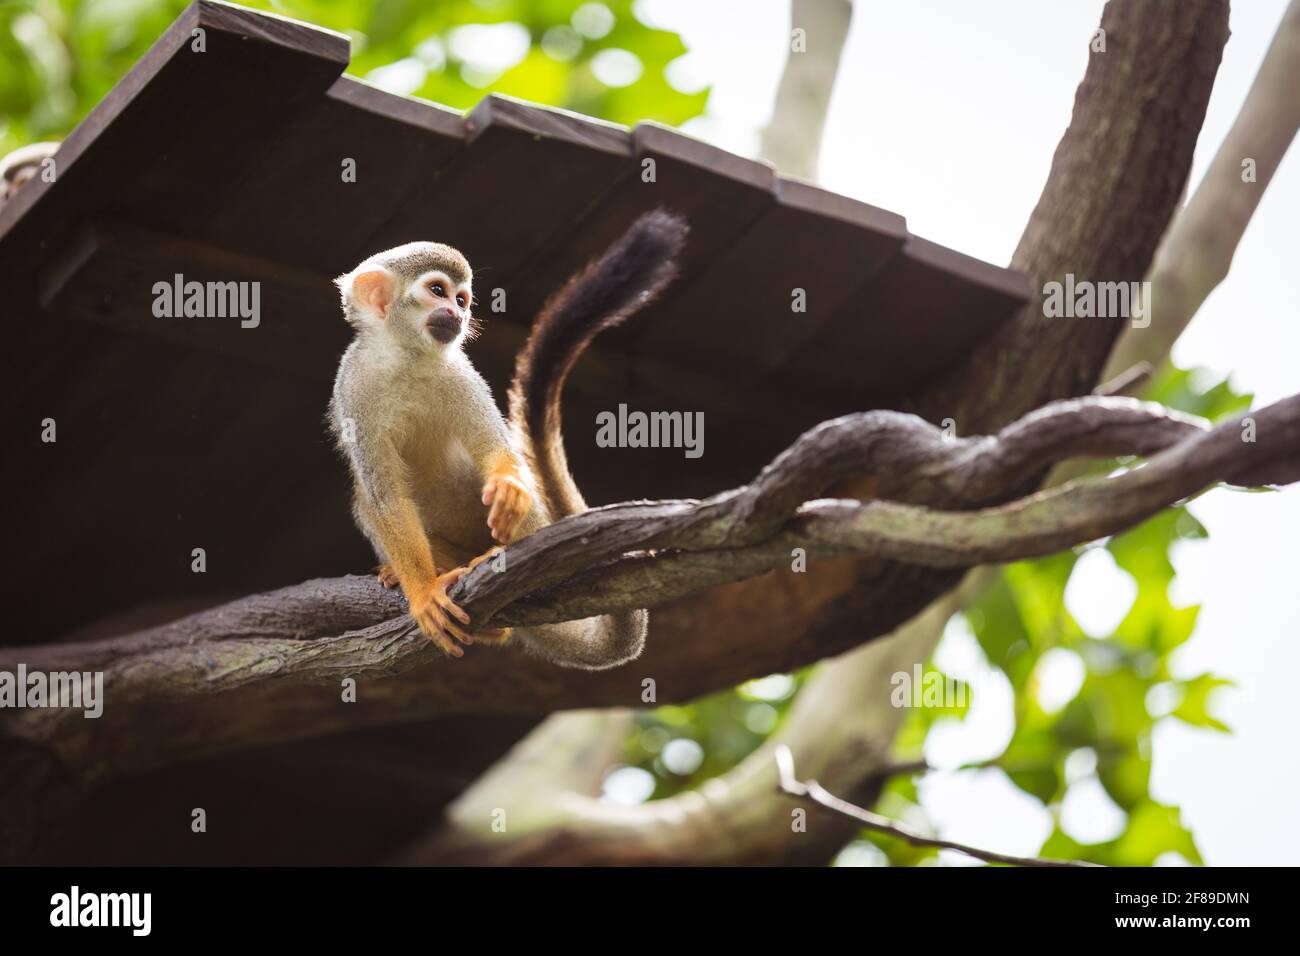 One squirrel monkey on top of a tree looking to the side. Stock Photo